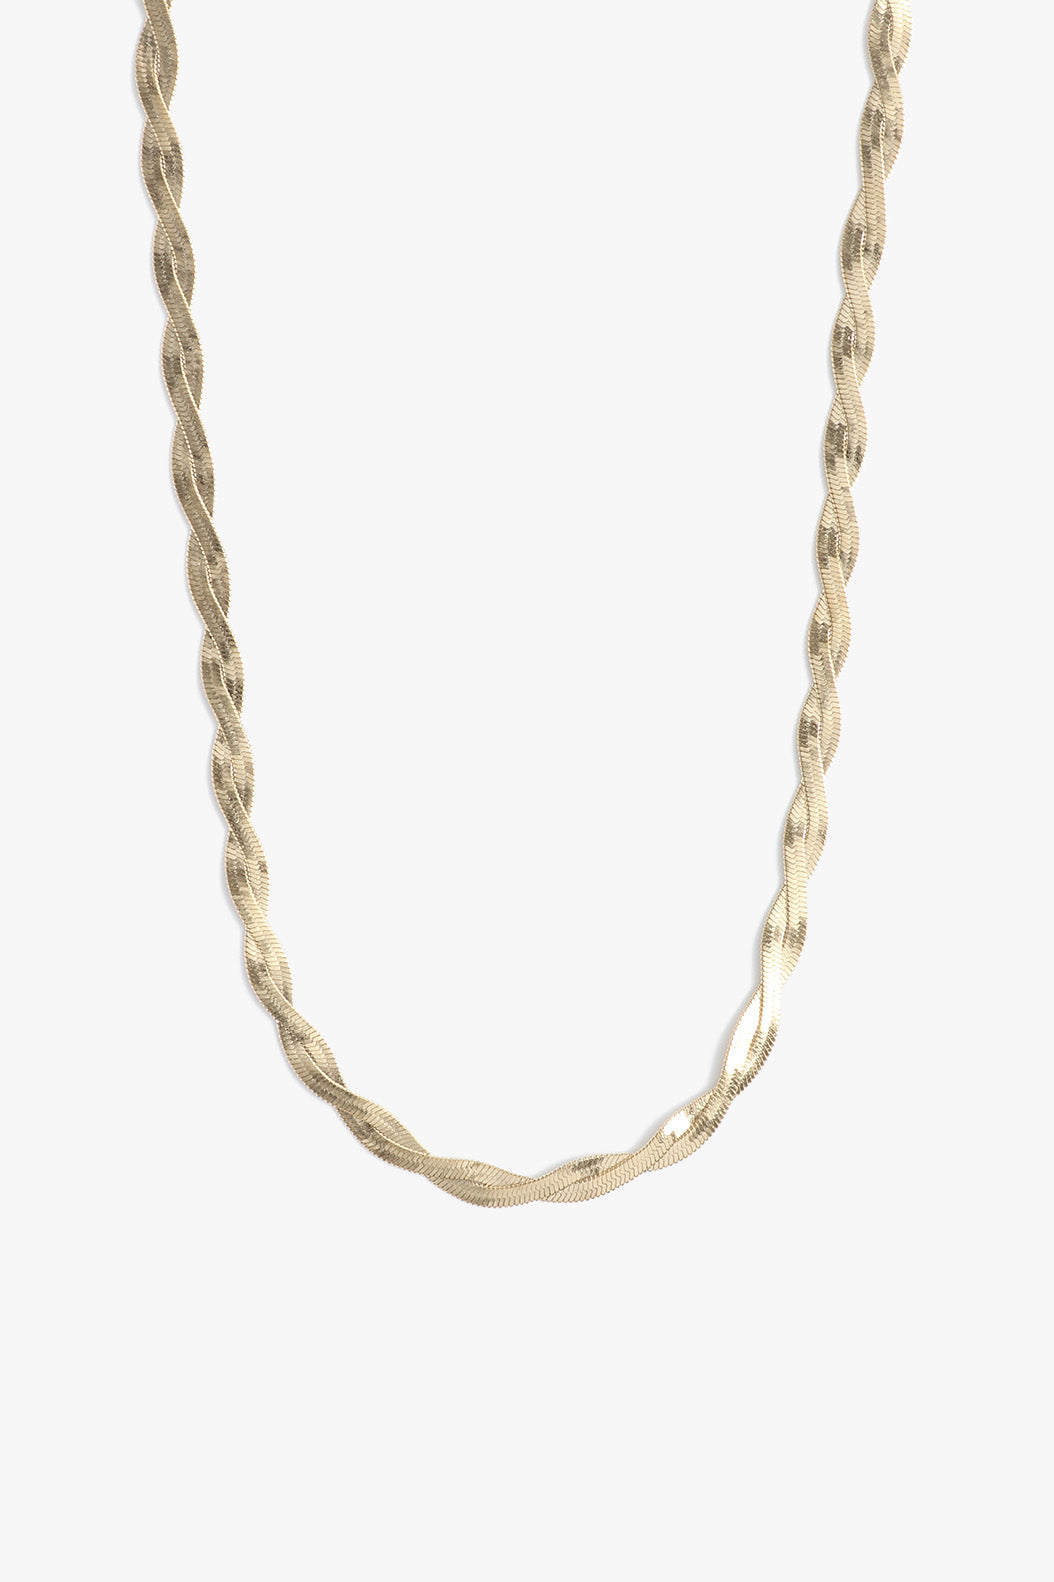 Marrin Costello Jewelry Ramsey Twist Chain snake herringbone chain braided together with lobster clasp closure and extender. Waterproof, sustainable, hypoallergenic. 14k gold plated stainless steel.